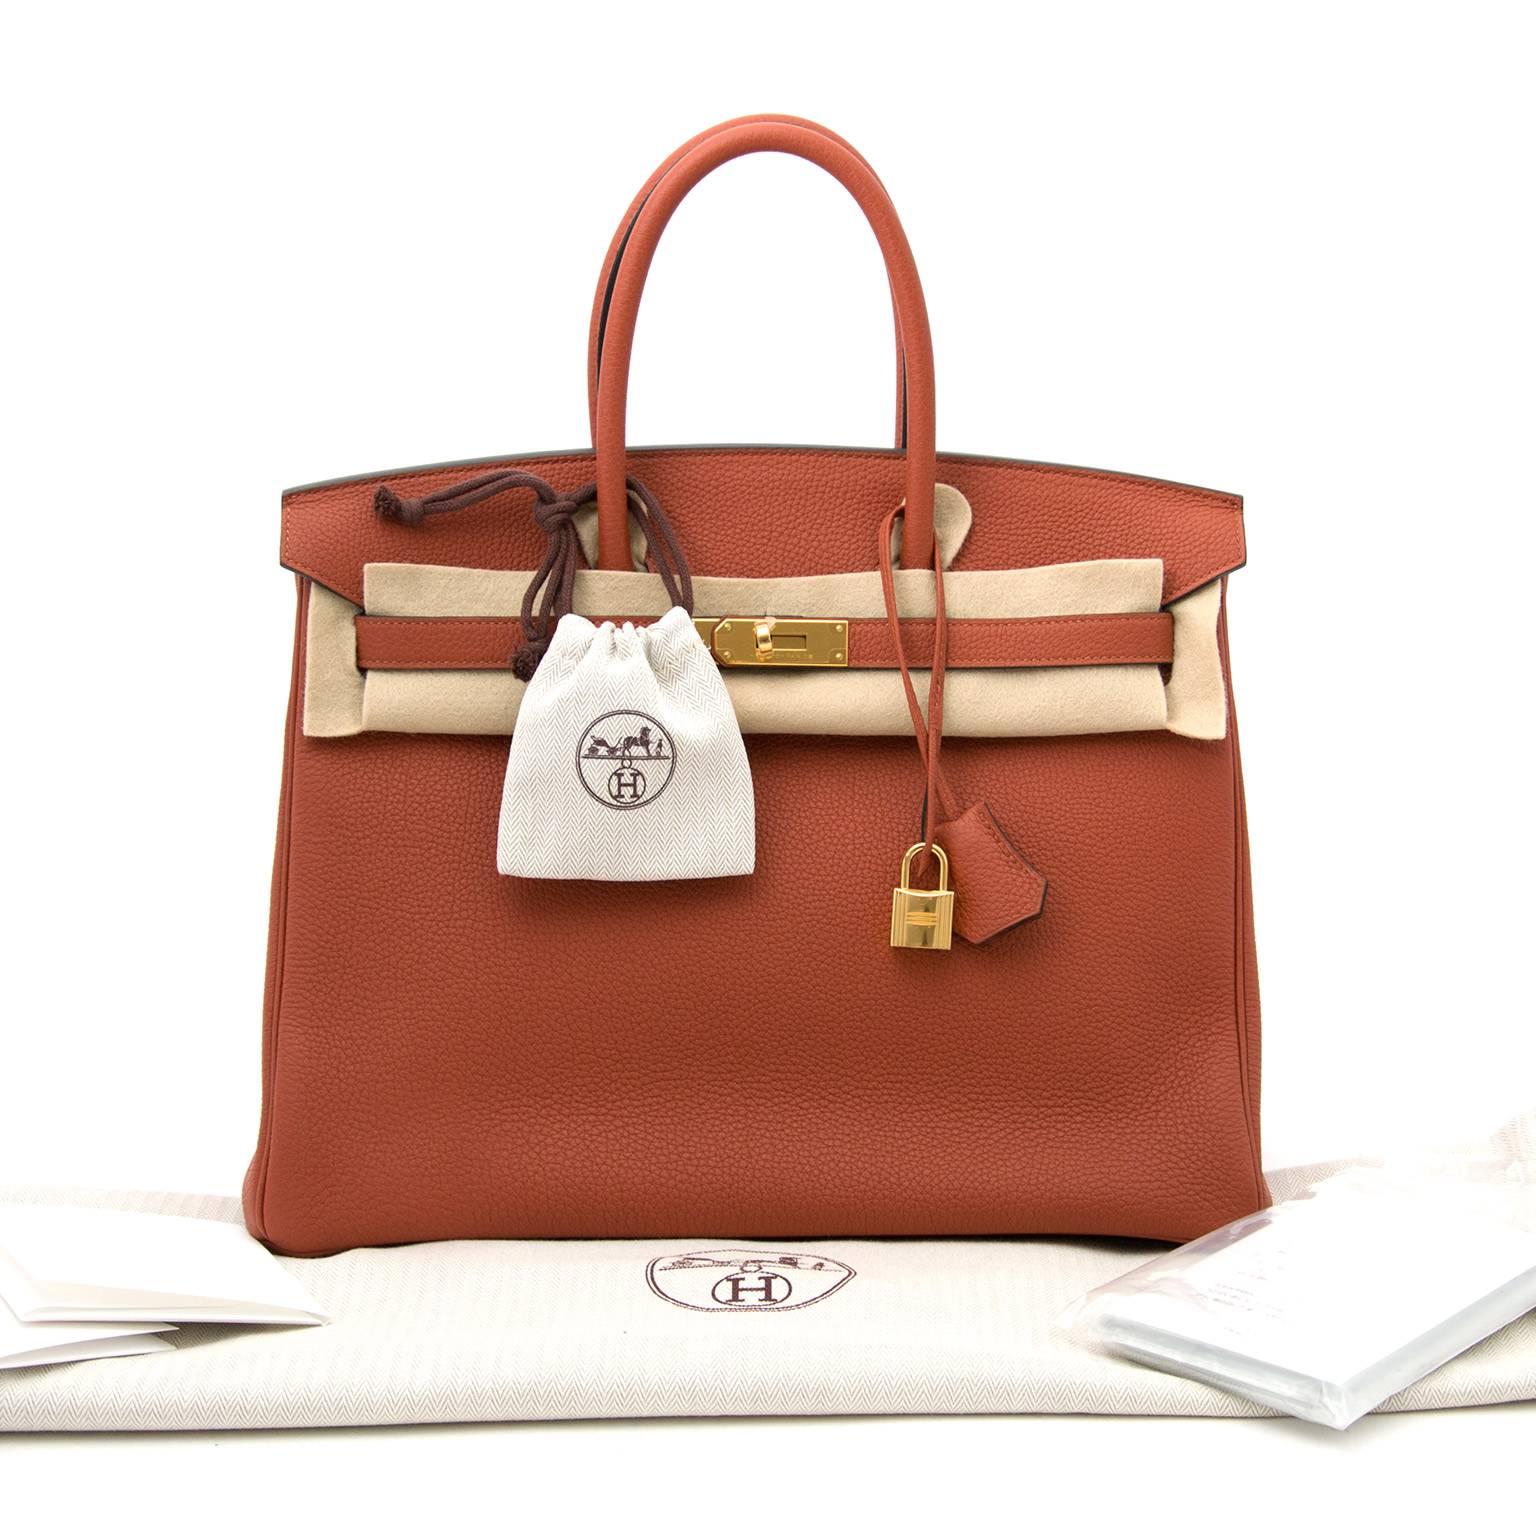 Brand New Hermès Birkin 35 Cuivre Togo GHW
Skip the waitinglist and get your brand new Birkin made out of premium Togo leather in the distinguished cuivre color.
The Togo leather is a high quality leather that keeps your bag in its timeless